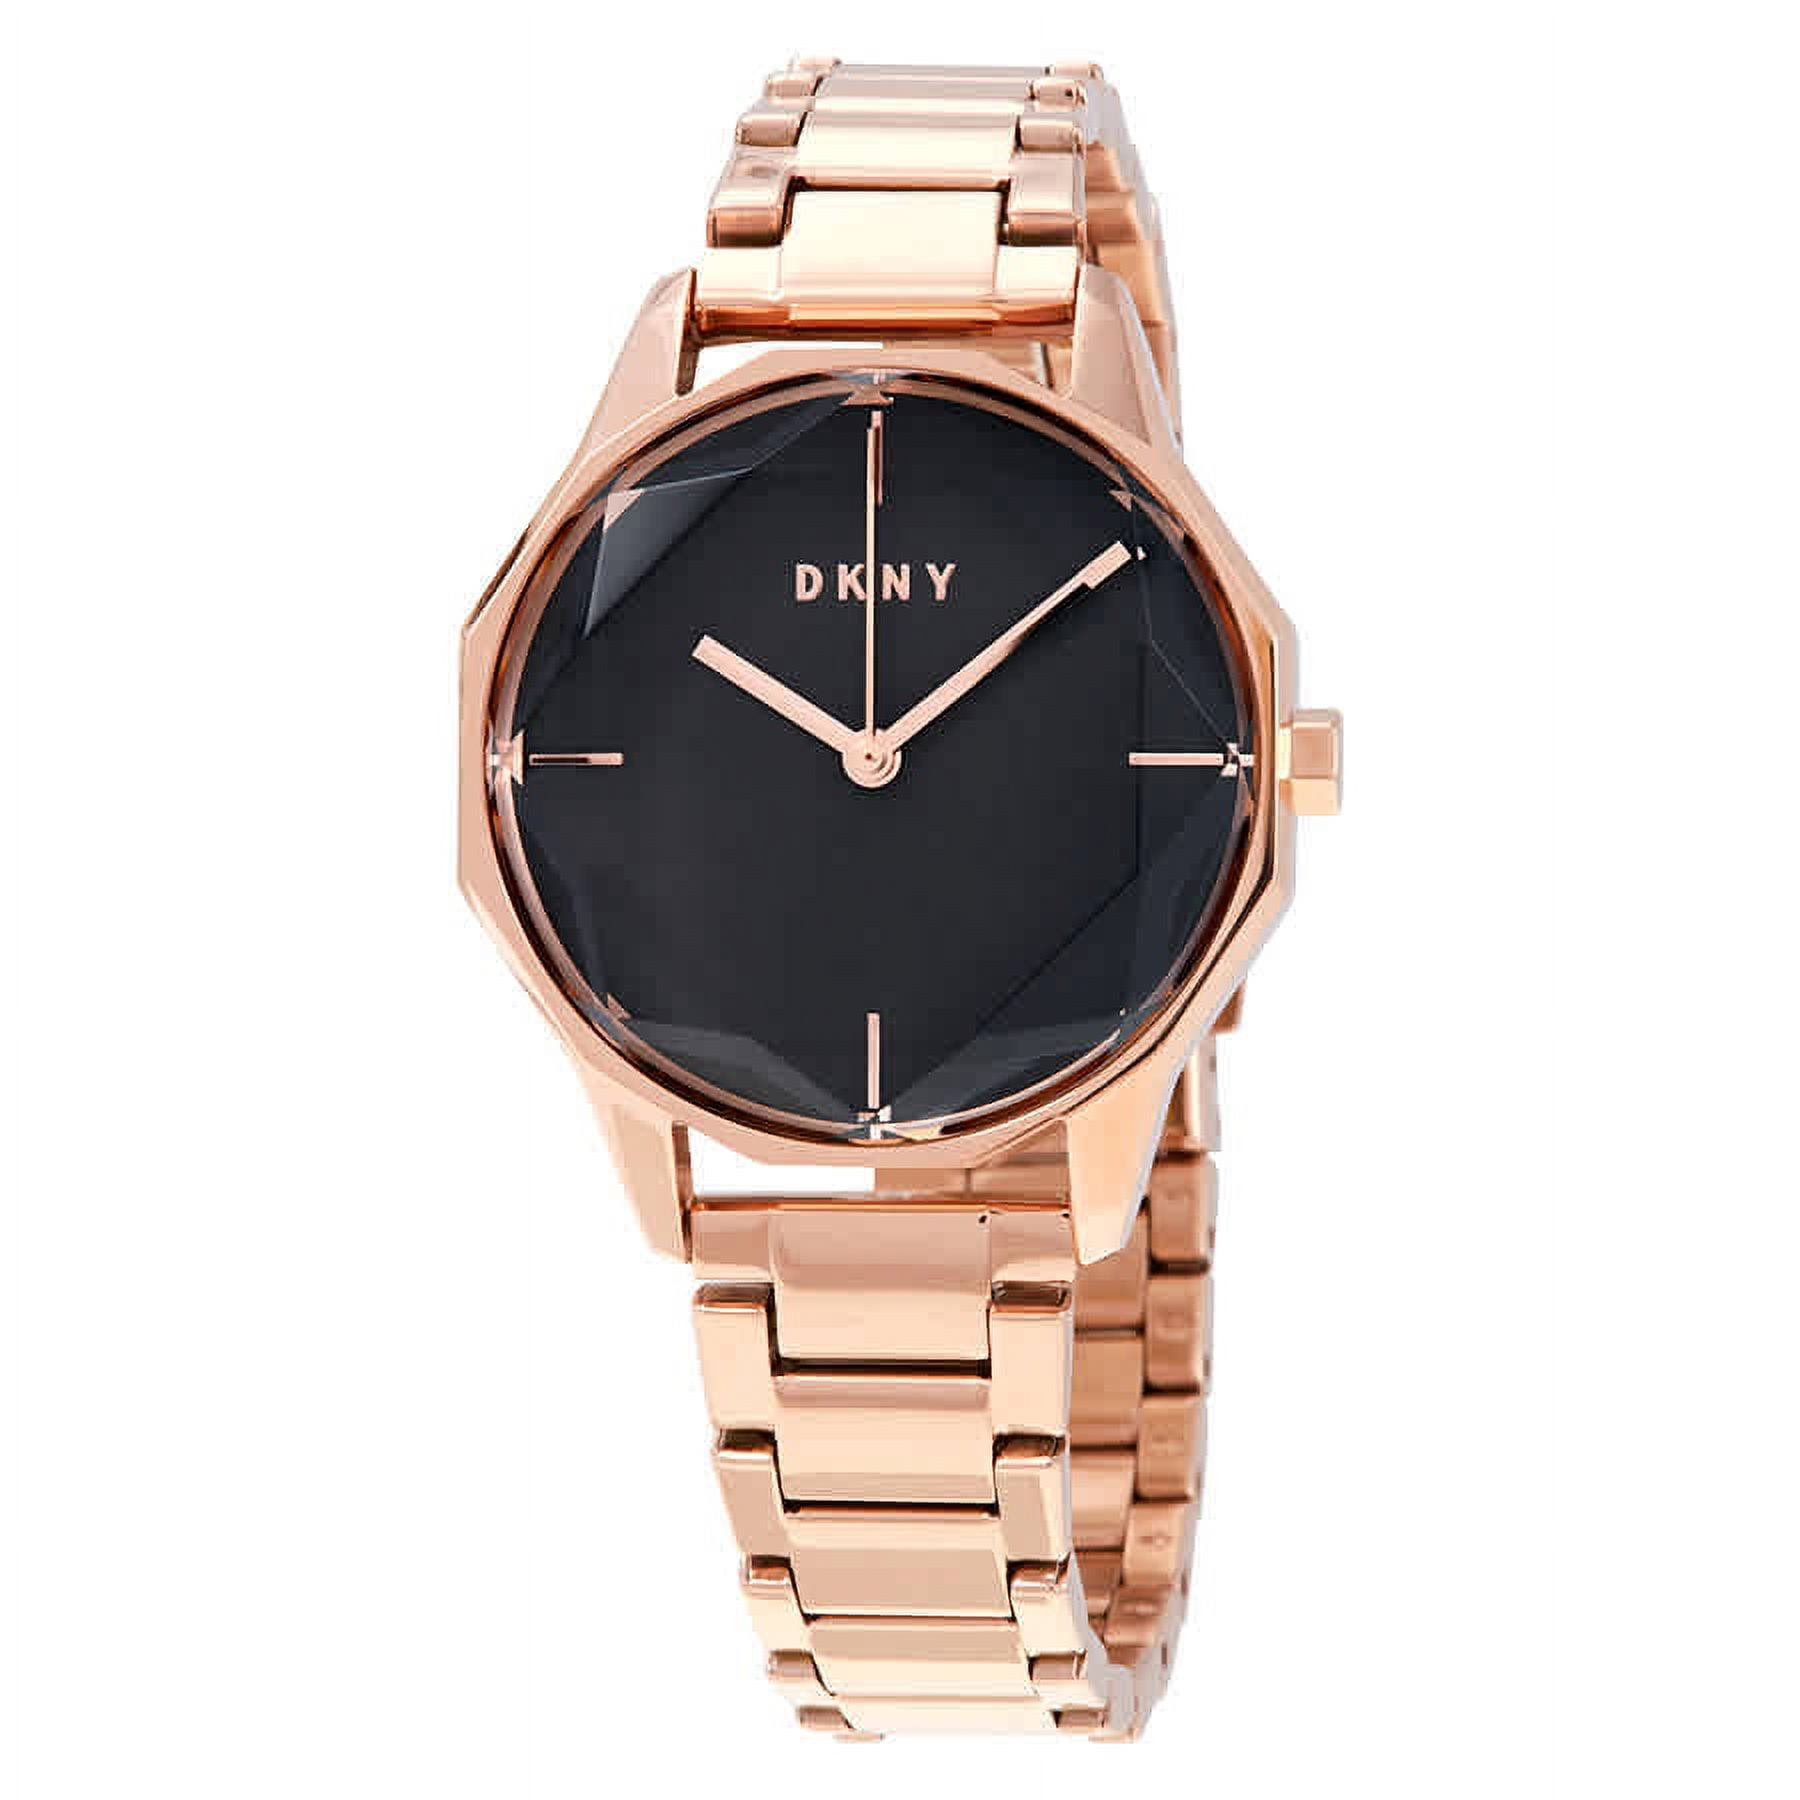 Pink gold watch Dkny Metallic in Pink gold - 28451305